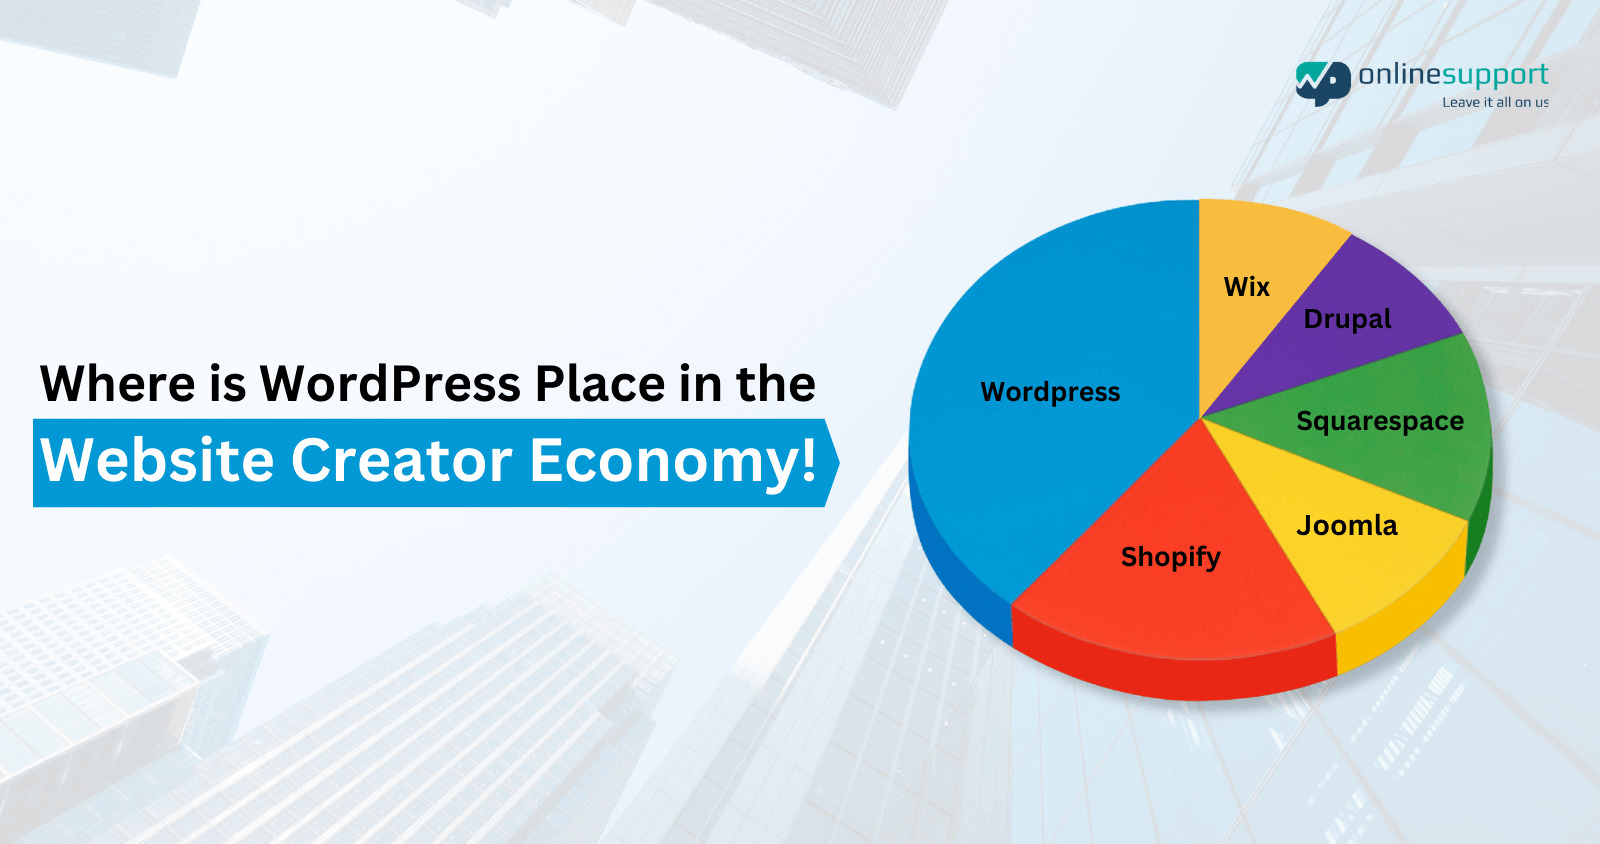 Where is WordPress Place in the Website Creator Economy!